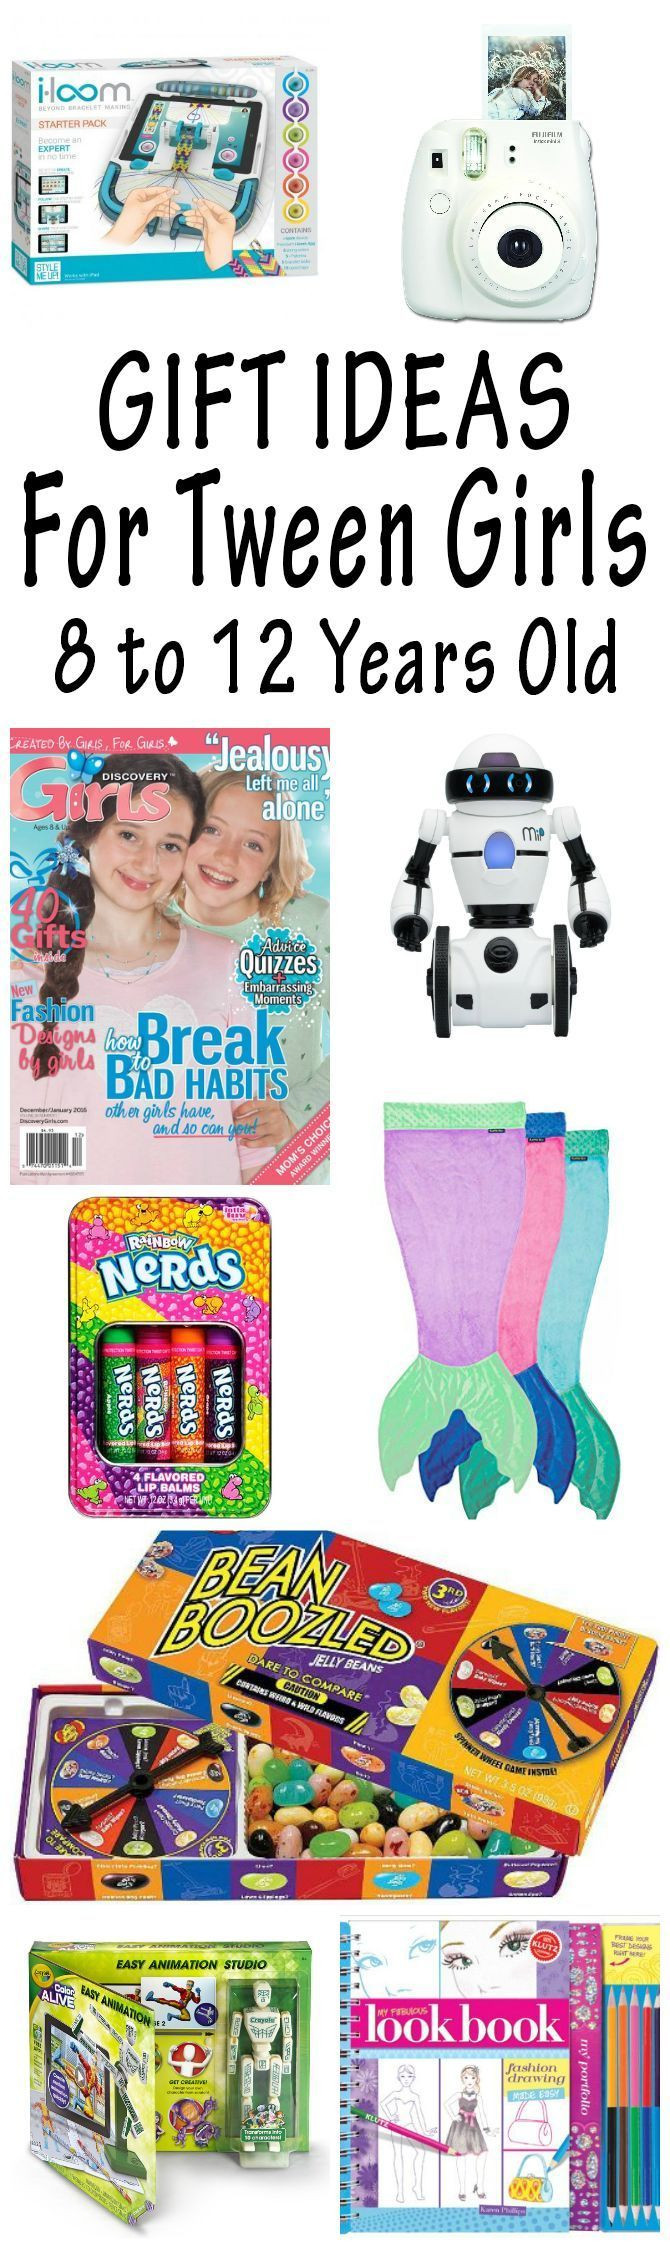 Girls Gift Ideas Age 8
 24 best Gift Ideas Girls Age 8 to 12 images on Pinterest